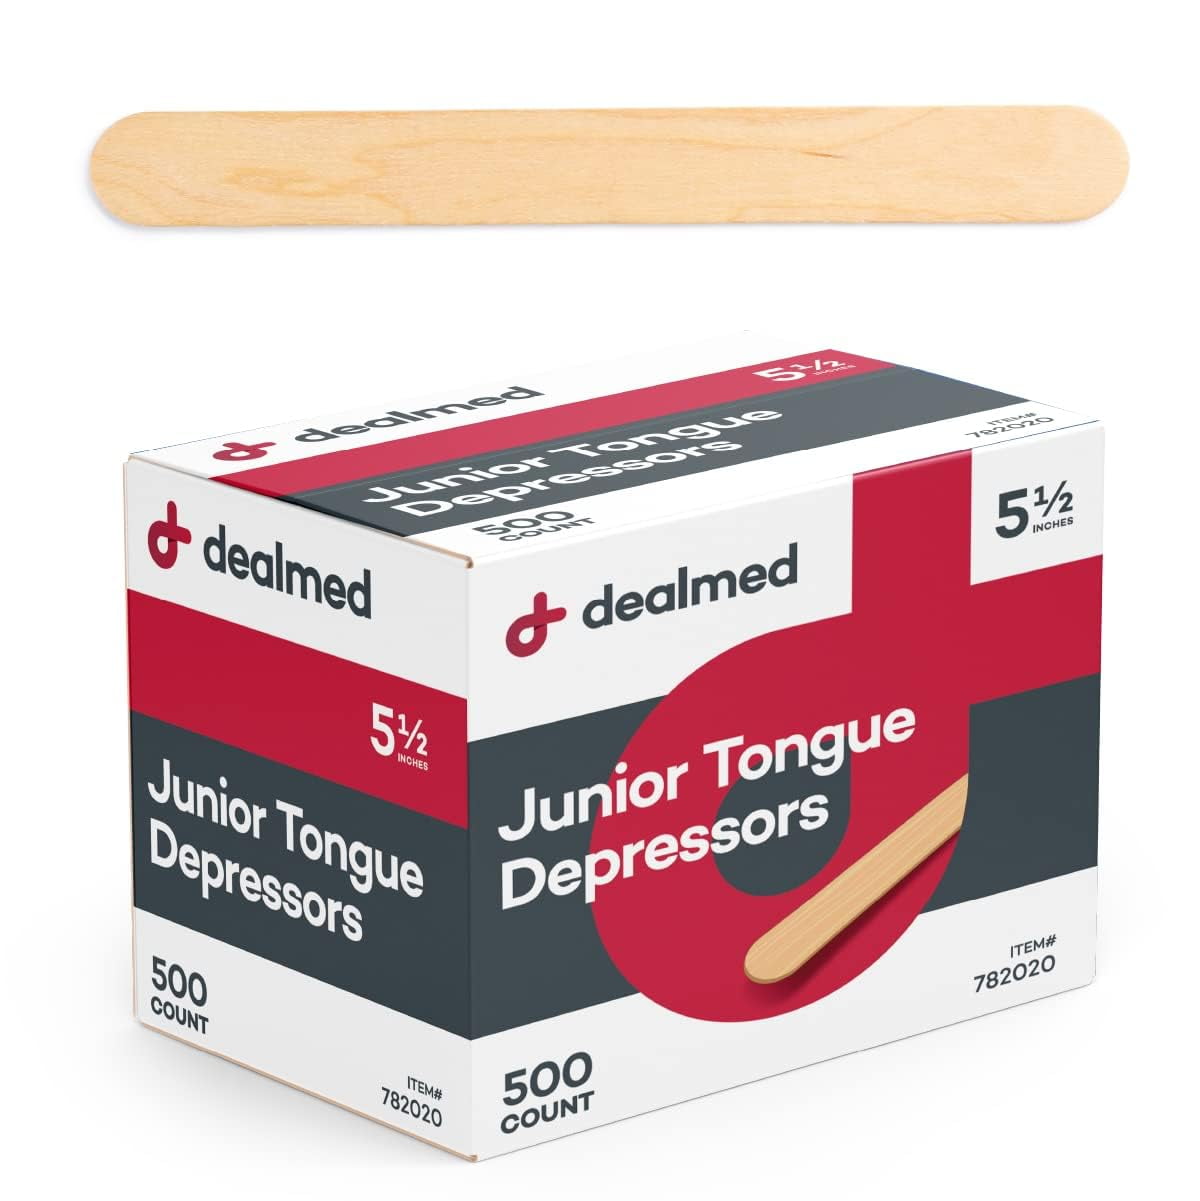 Dealmed 5.5” Junior Tongue Depressors – 500 Non-Sterile Wood Tongue  Depressor Sticks, Can Be Used as Tongue Depressors for Crafts, in Medical